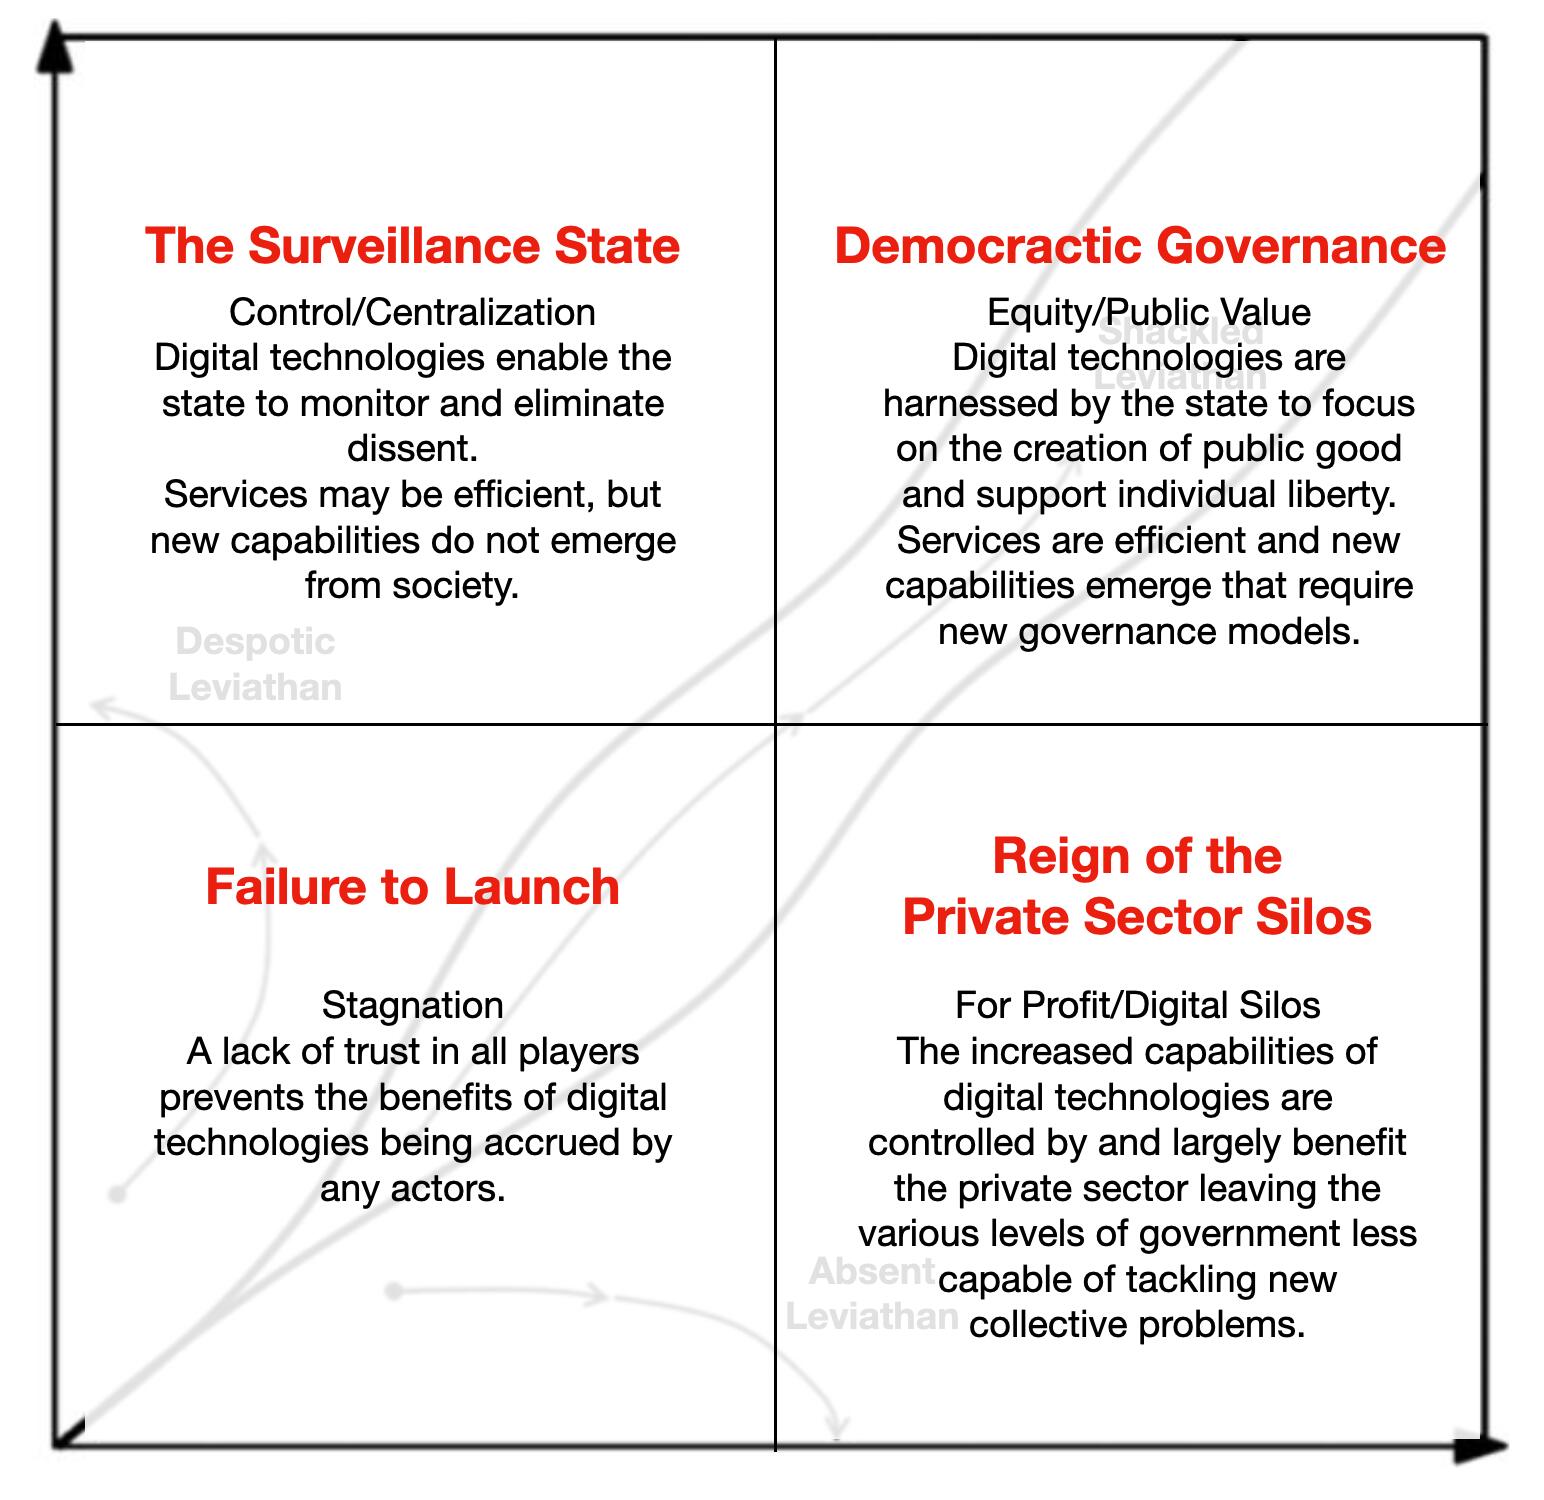 Four quadrants show clockwise starting in the upper-left: "The Suveillance State", "Democratic Governance", "Failure to Launch", and "reign of the Private Sector Silos"